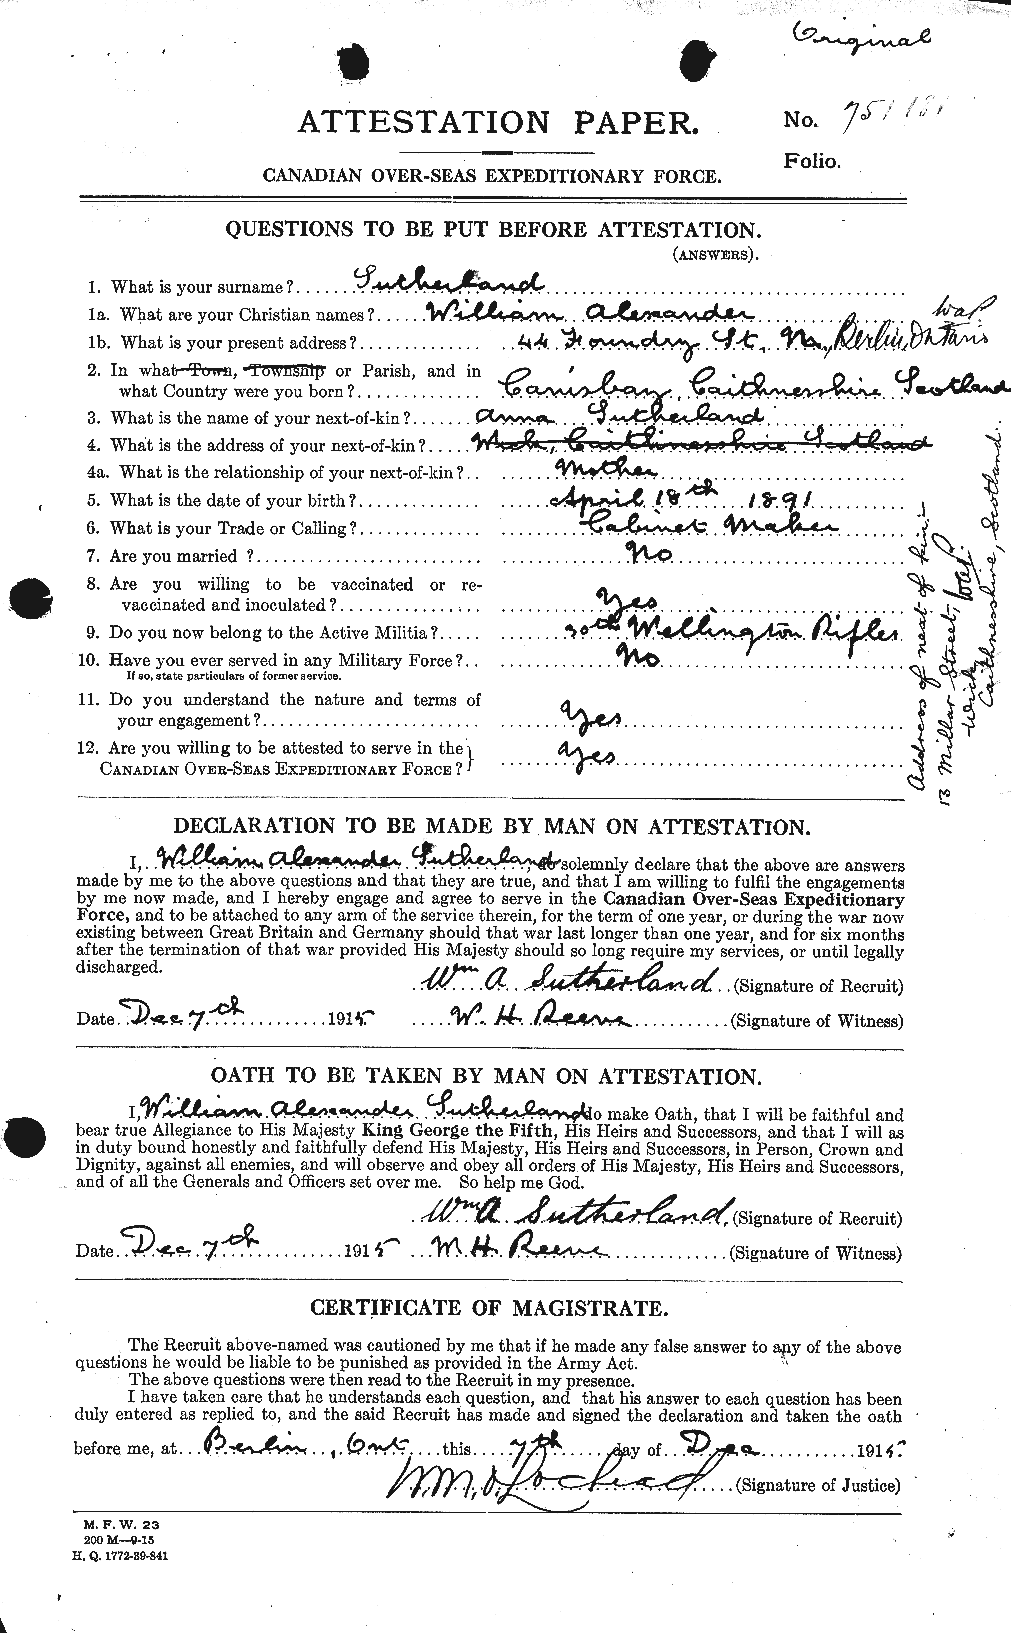 Personnel Records of the First World War - CEF 126448a